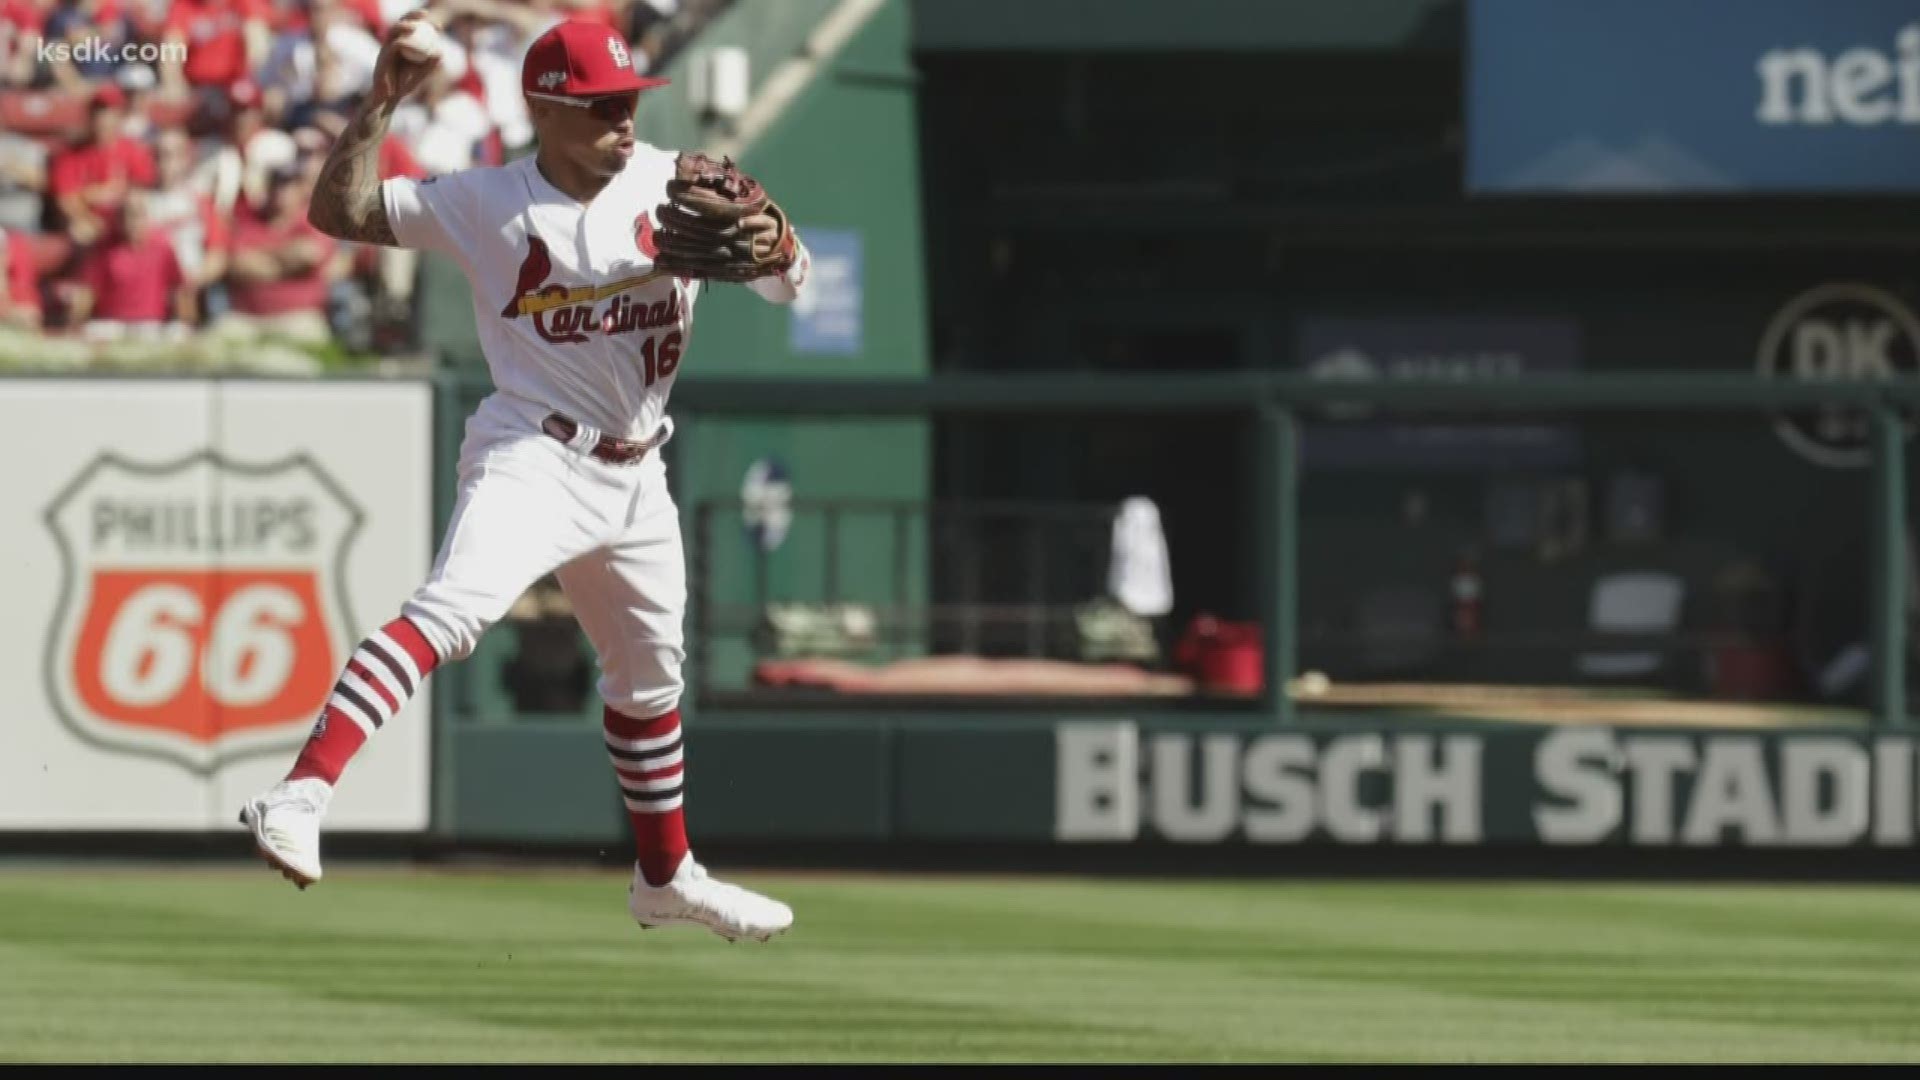 Defense was a huge part of the Cardinals' success in 2019. Now, they're getting recognized in a big way, with six Gold Glove finalists, the most of any team.